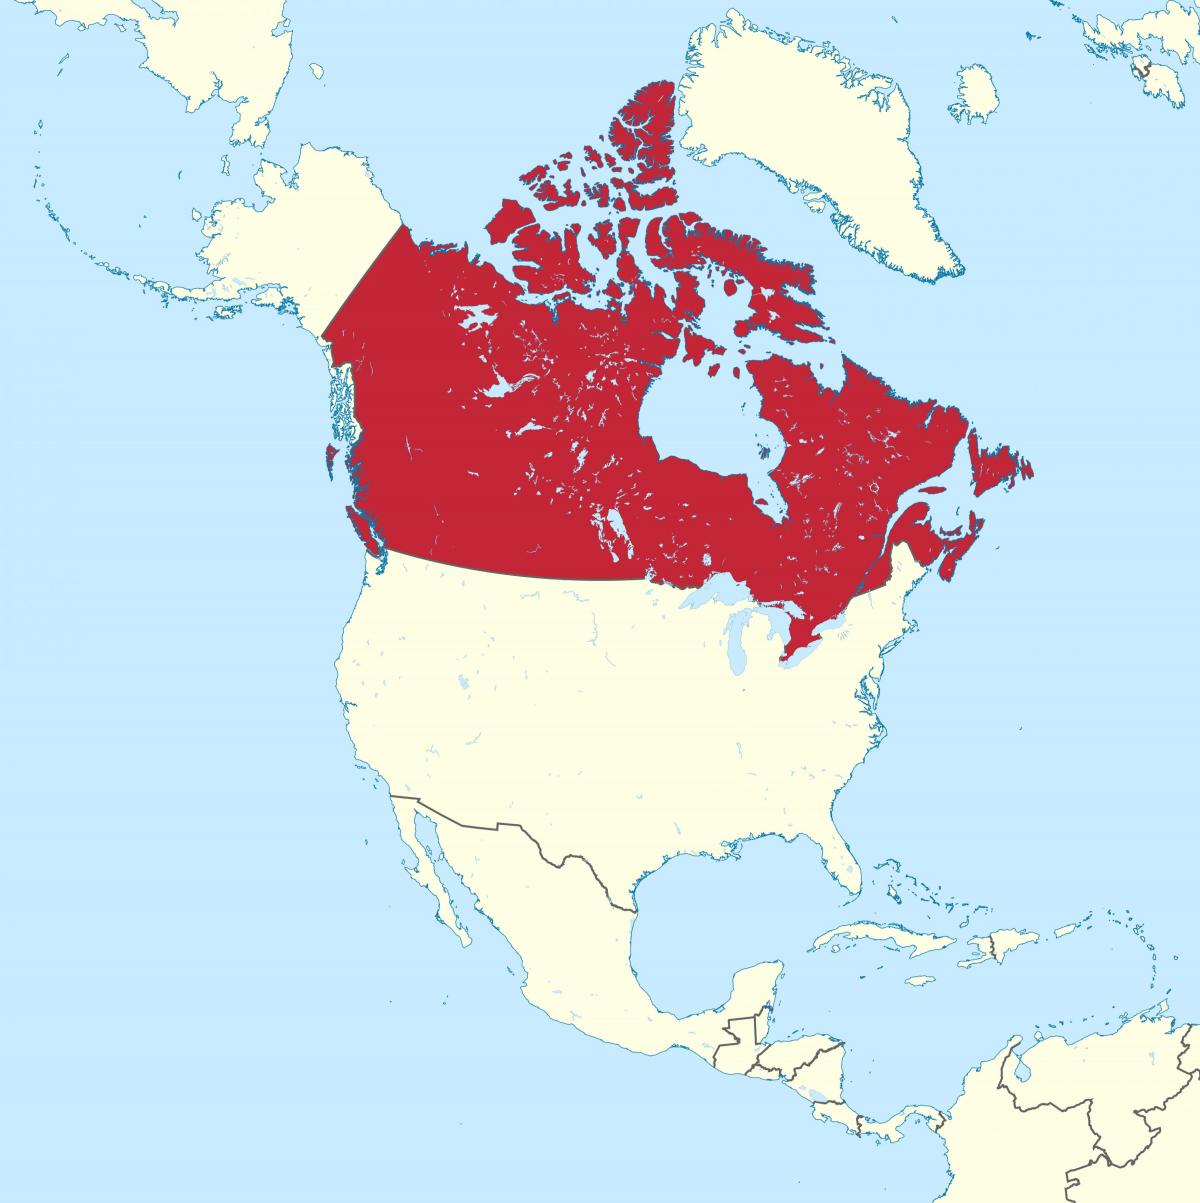 Canada location on the Americas map